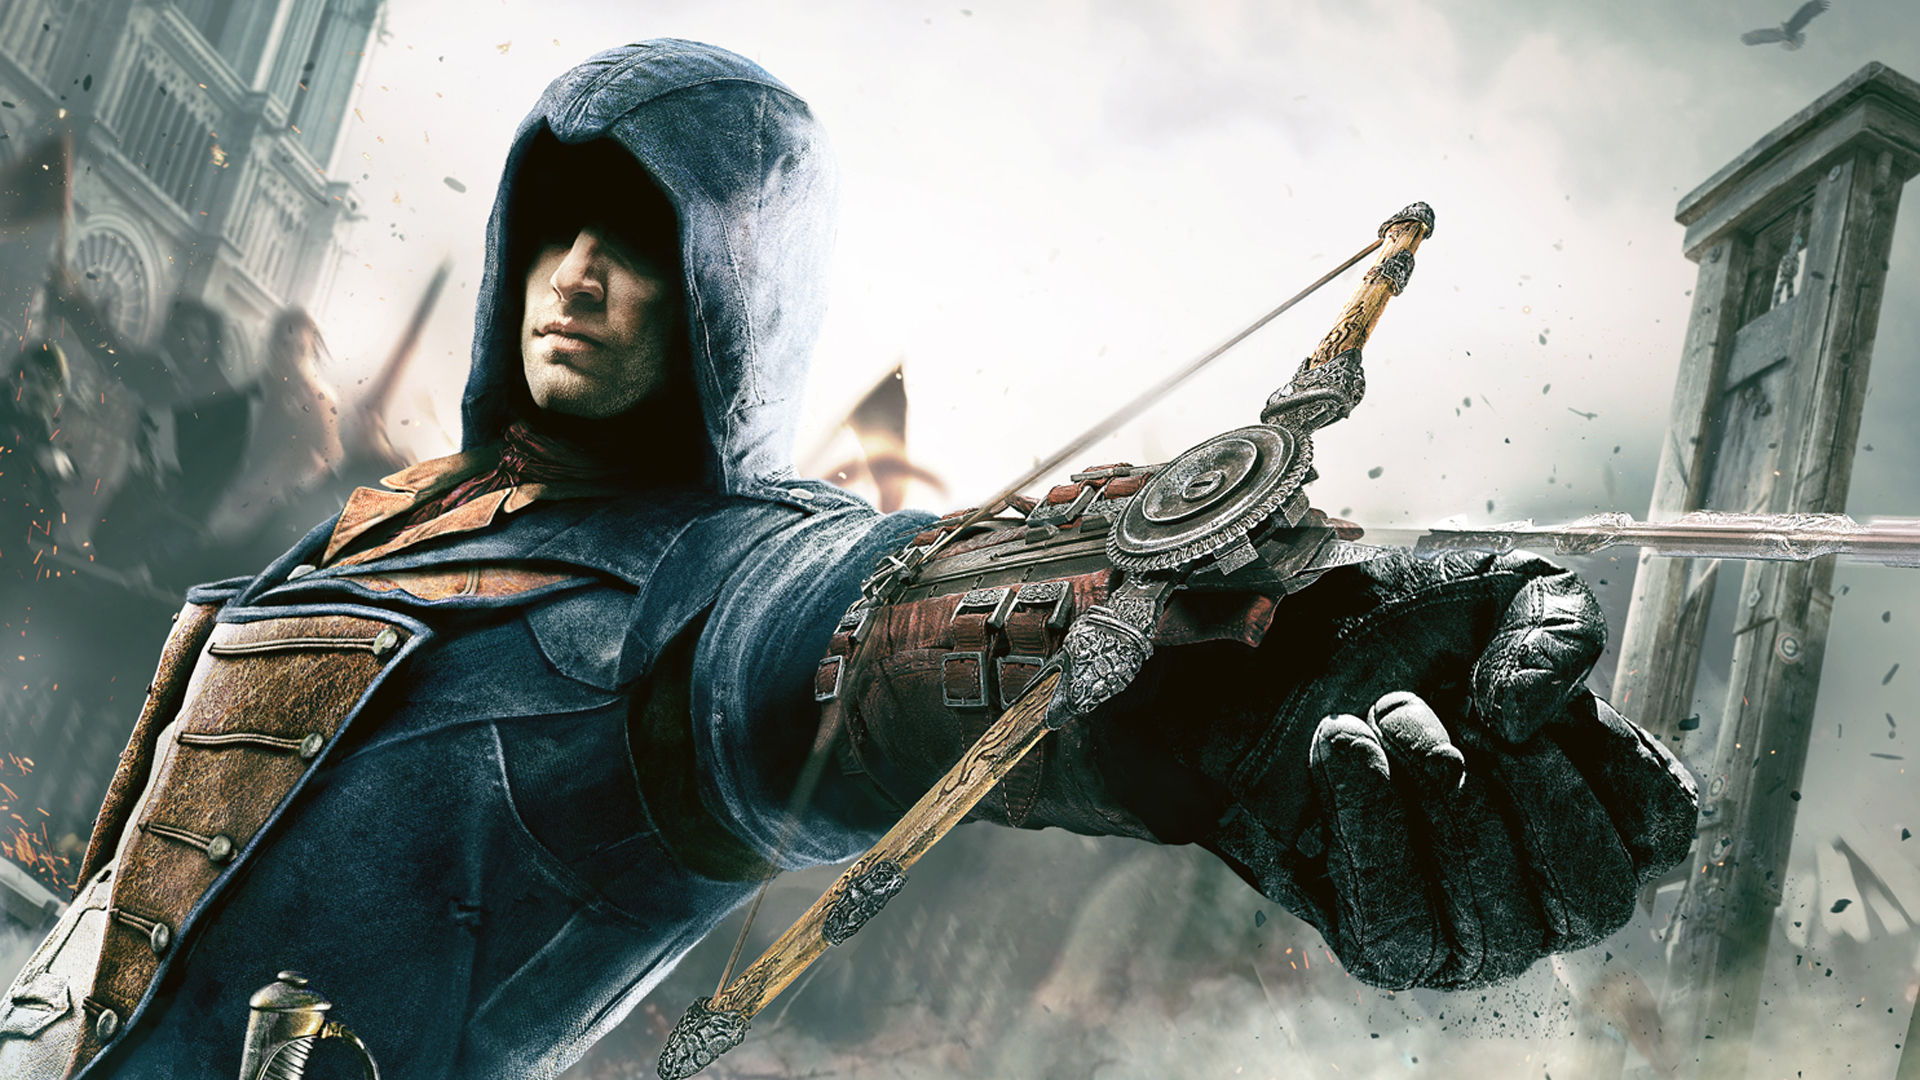 assassin's creed unity wallpaper hd,action adventure game,pc game,movie,action film,cg artwork